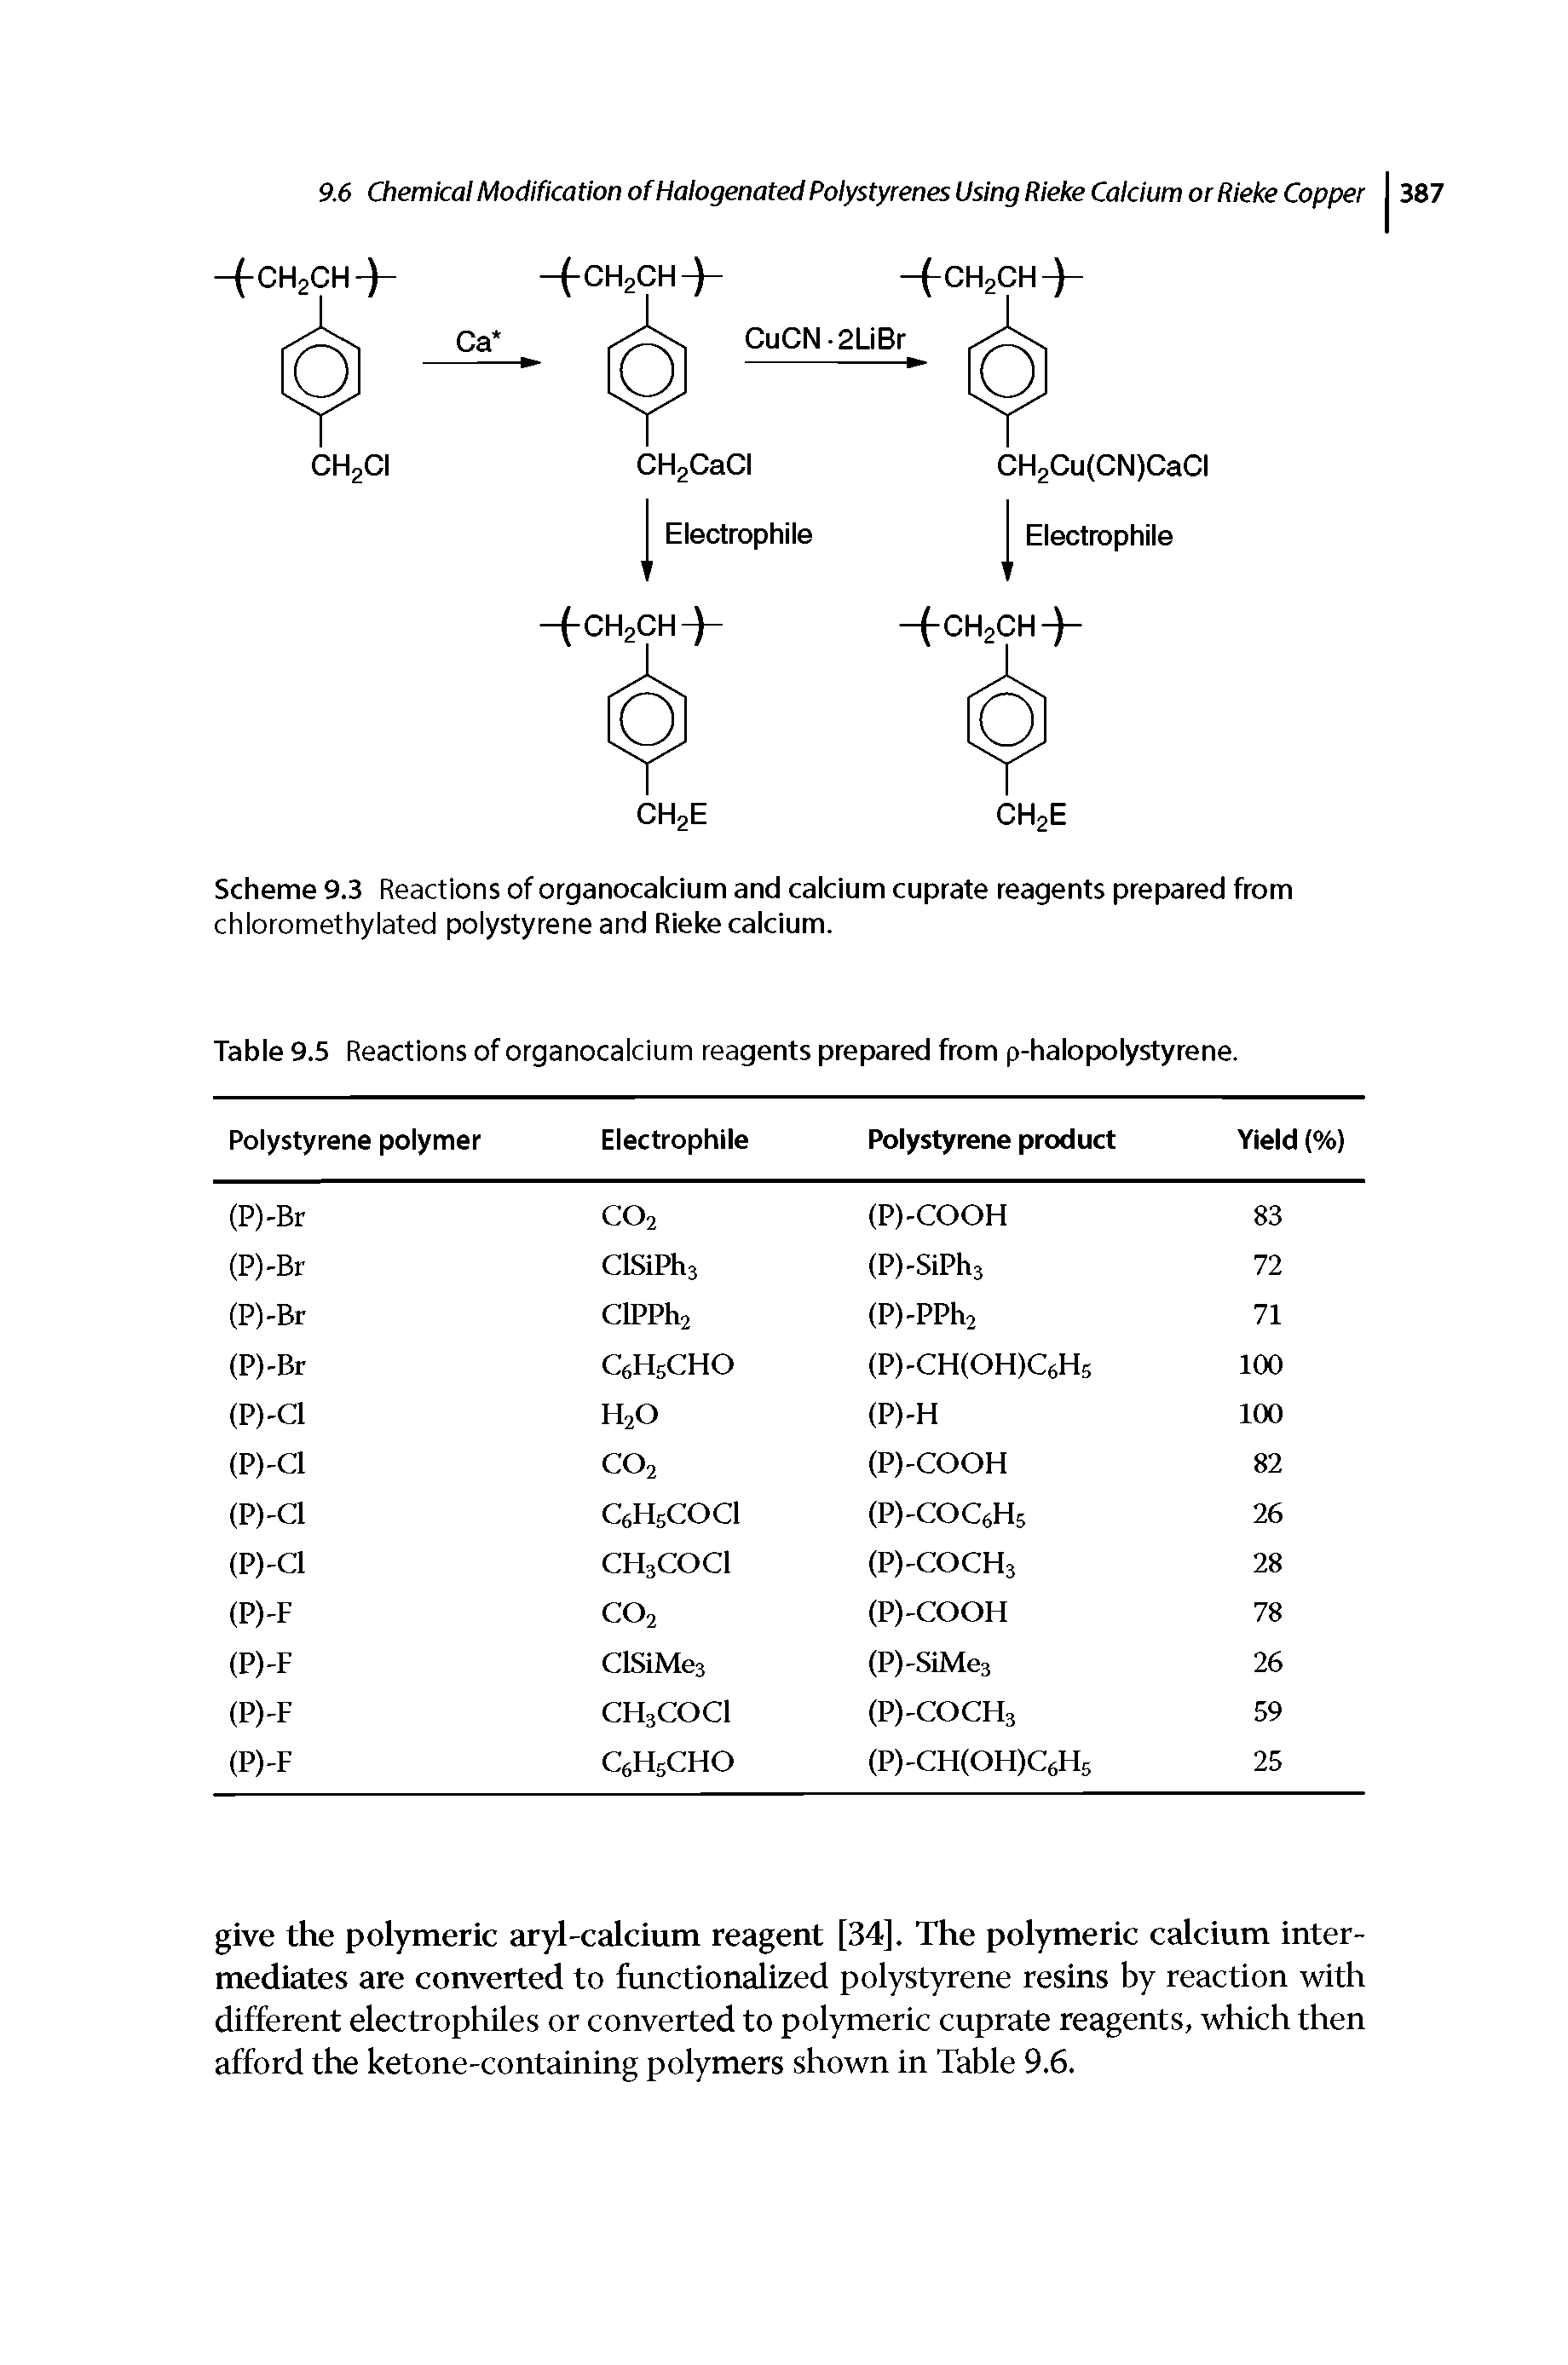 Scheme 9.3 Reactions of organocalcium and calcium cuprate reagents prepared from chloromethylated polystyrene and Rieke calcium.